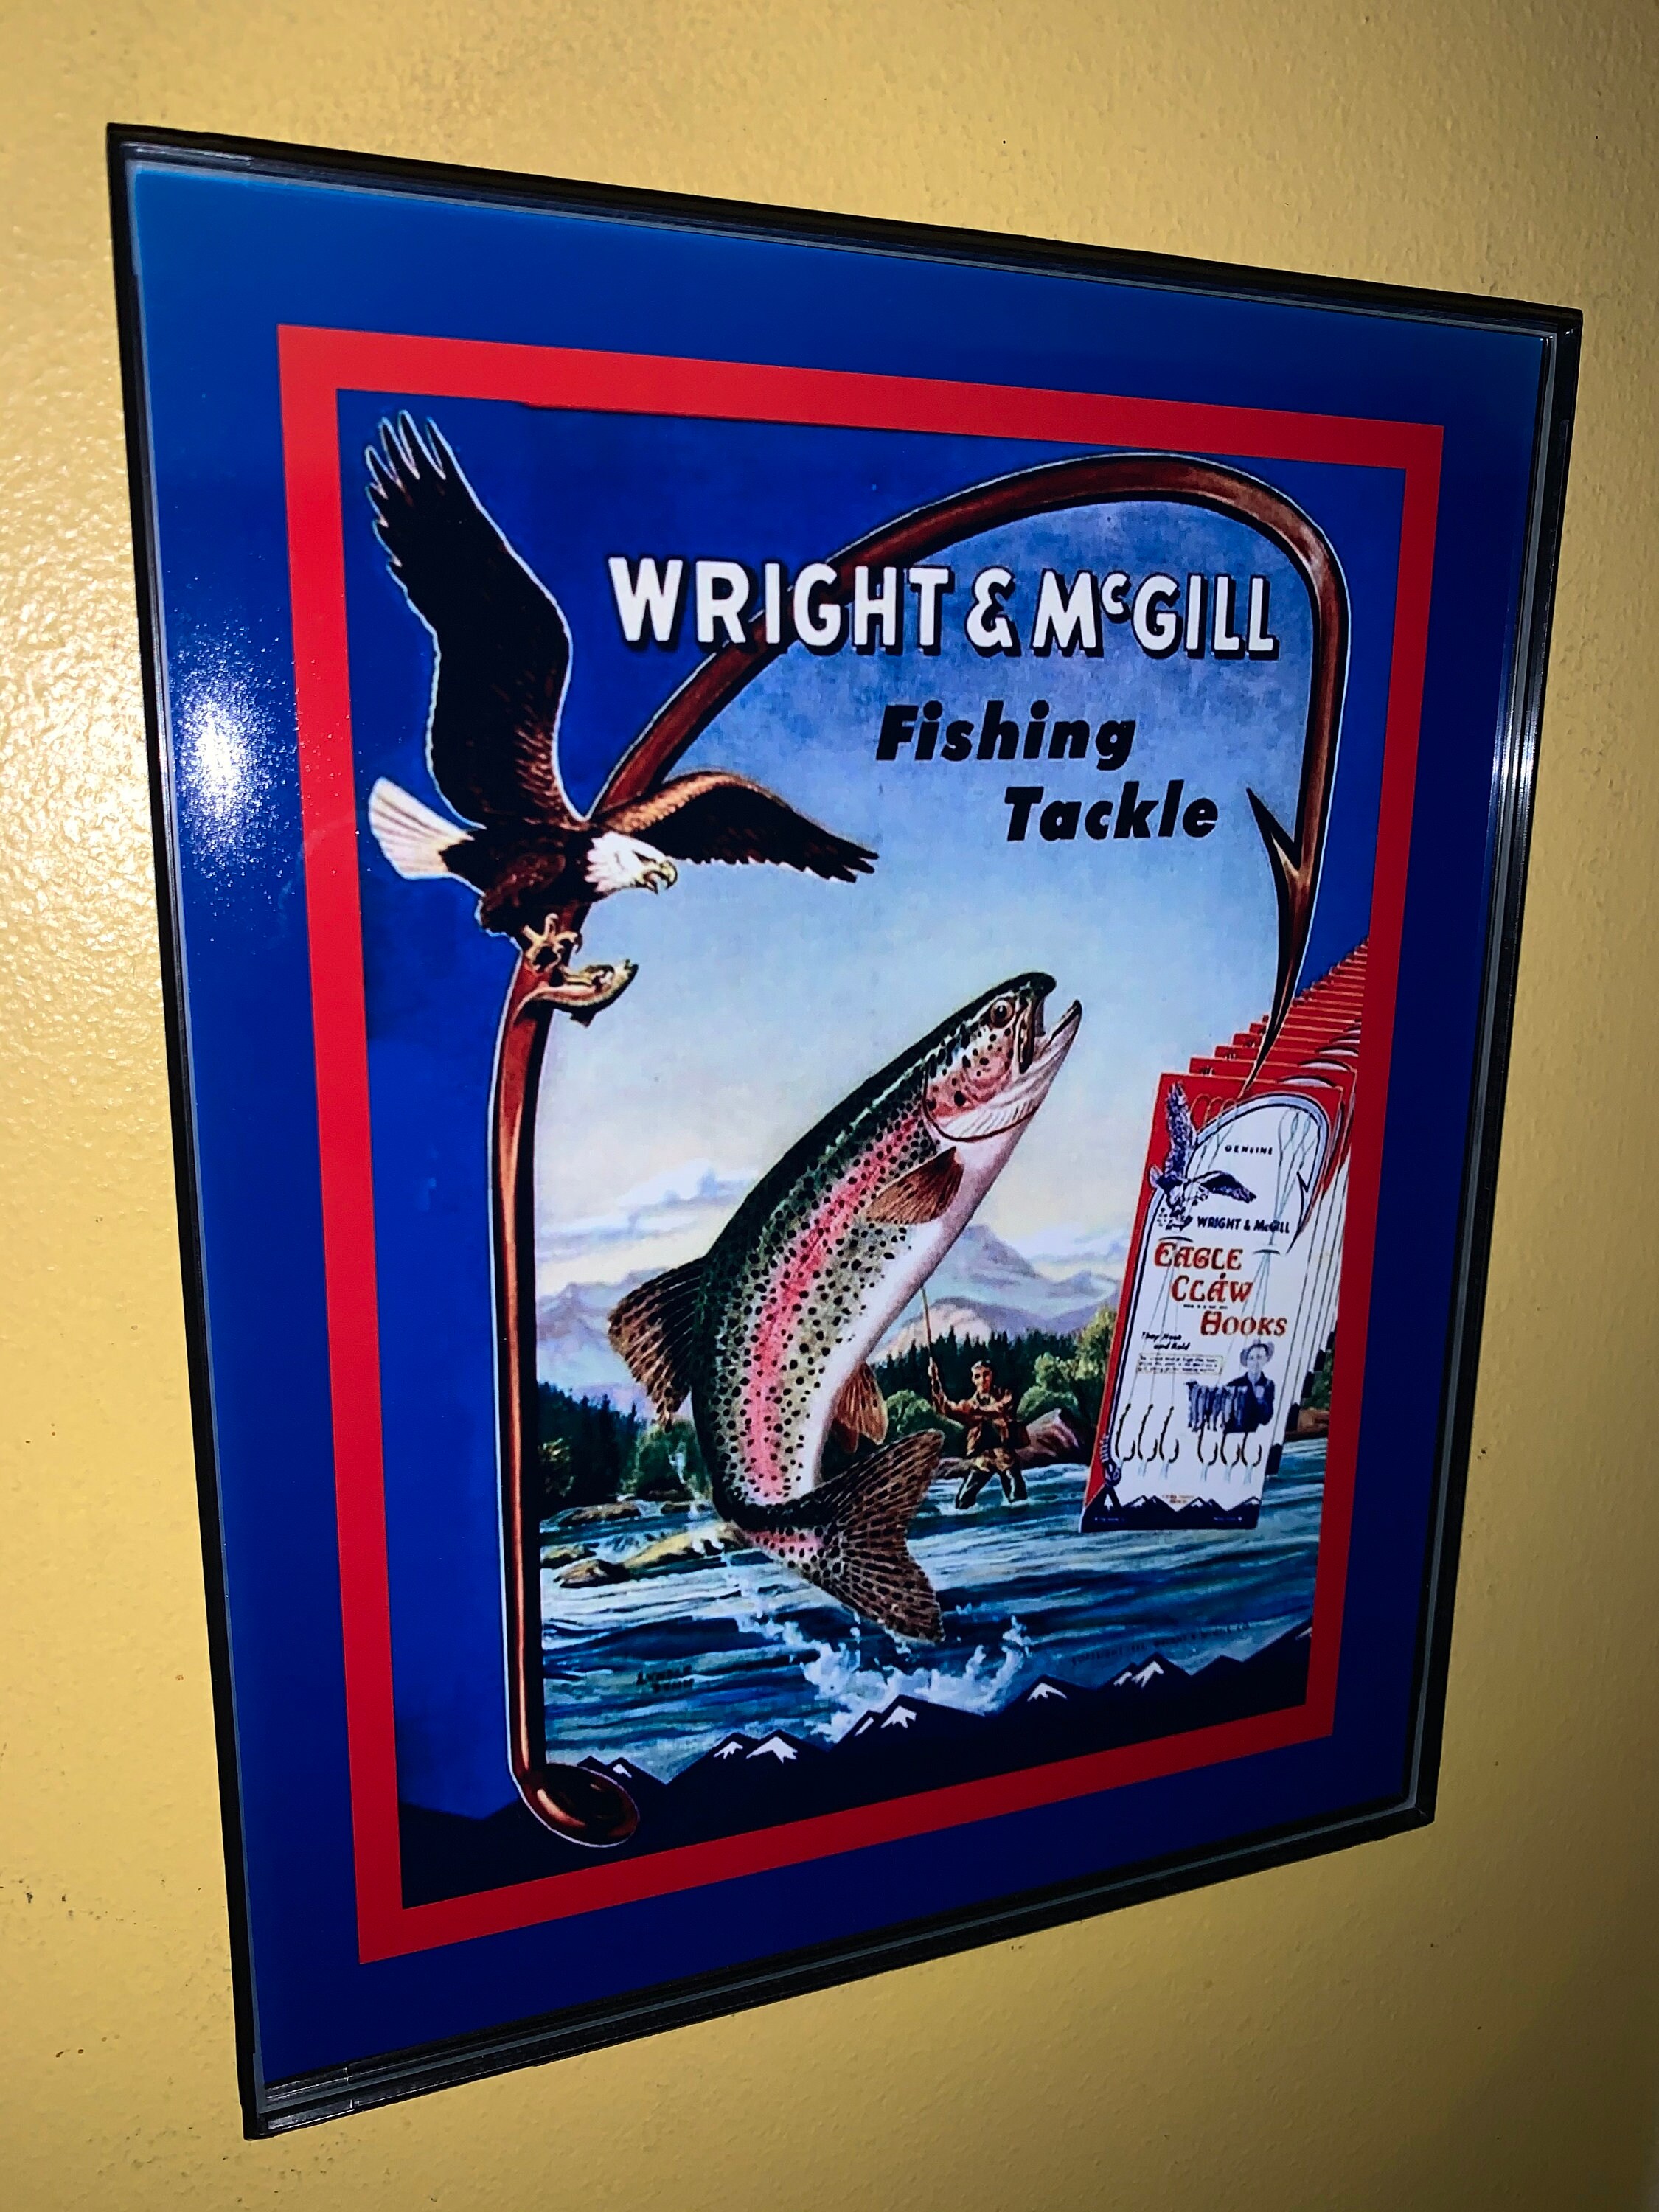 Sold at Auction: Wright & McGill Fishing Tackle Salesman Sample Book